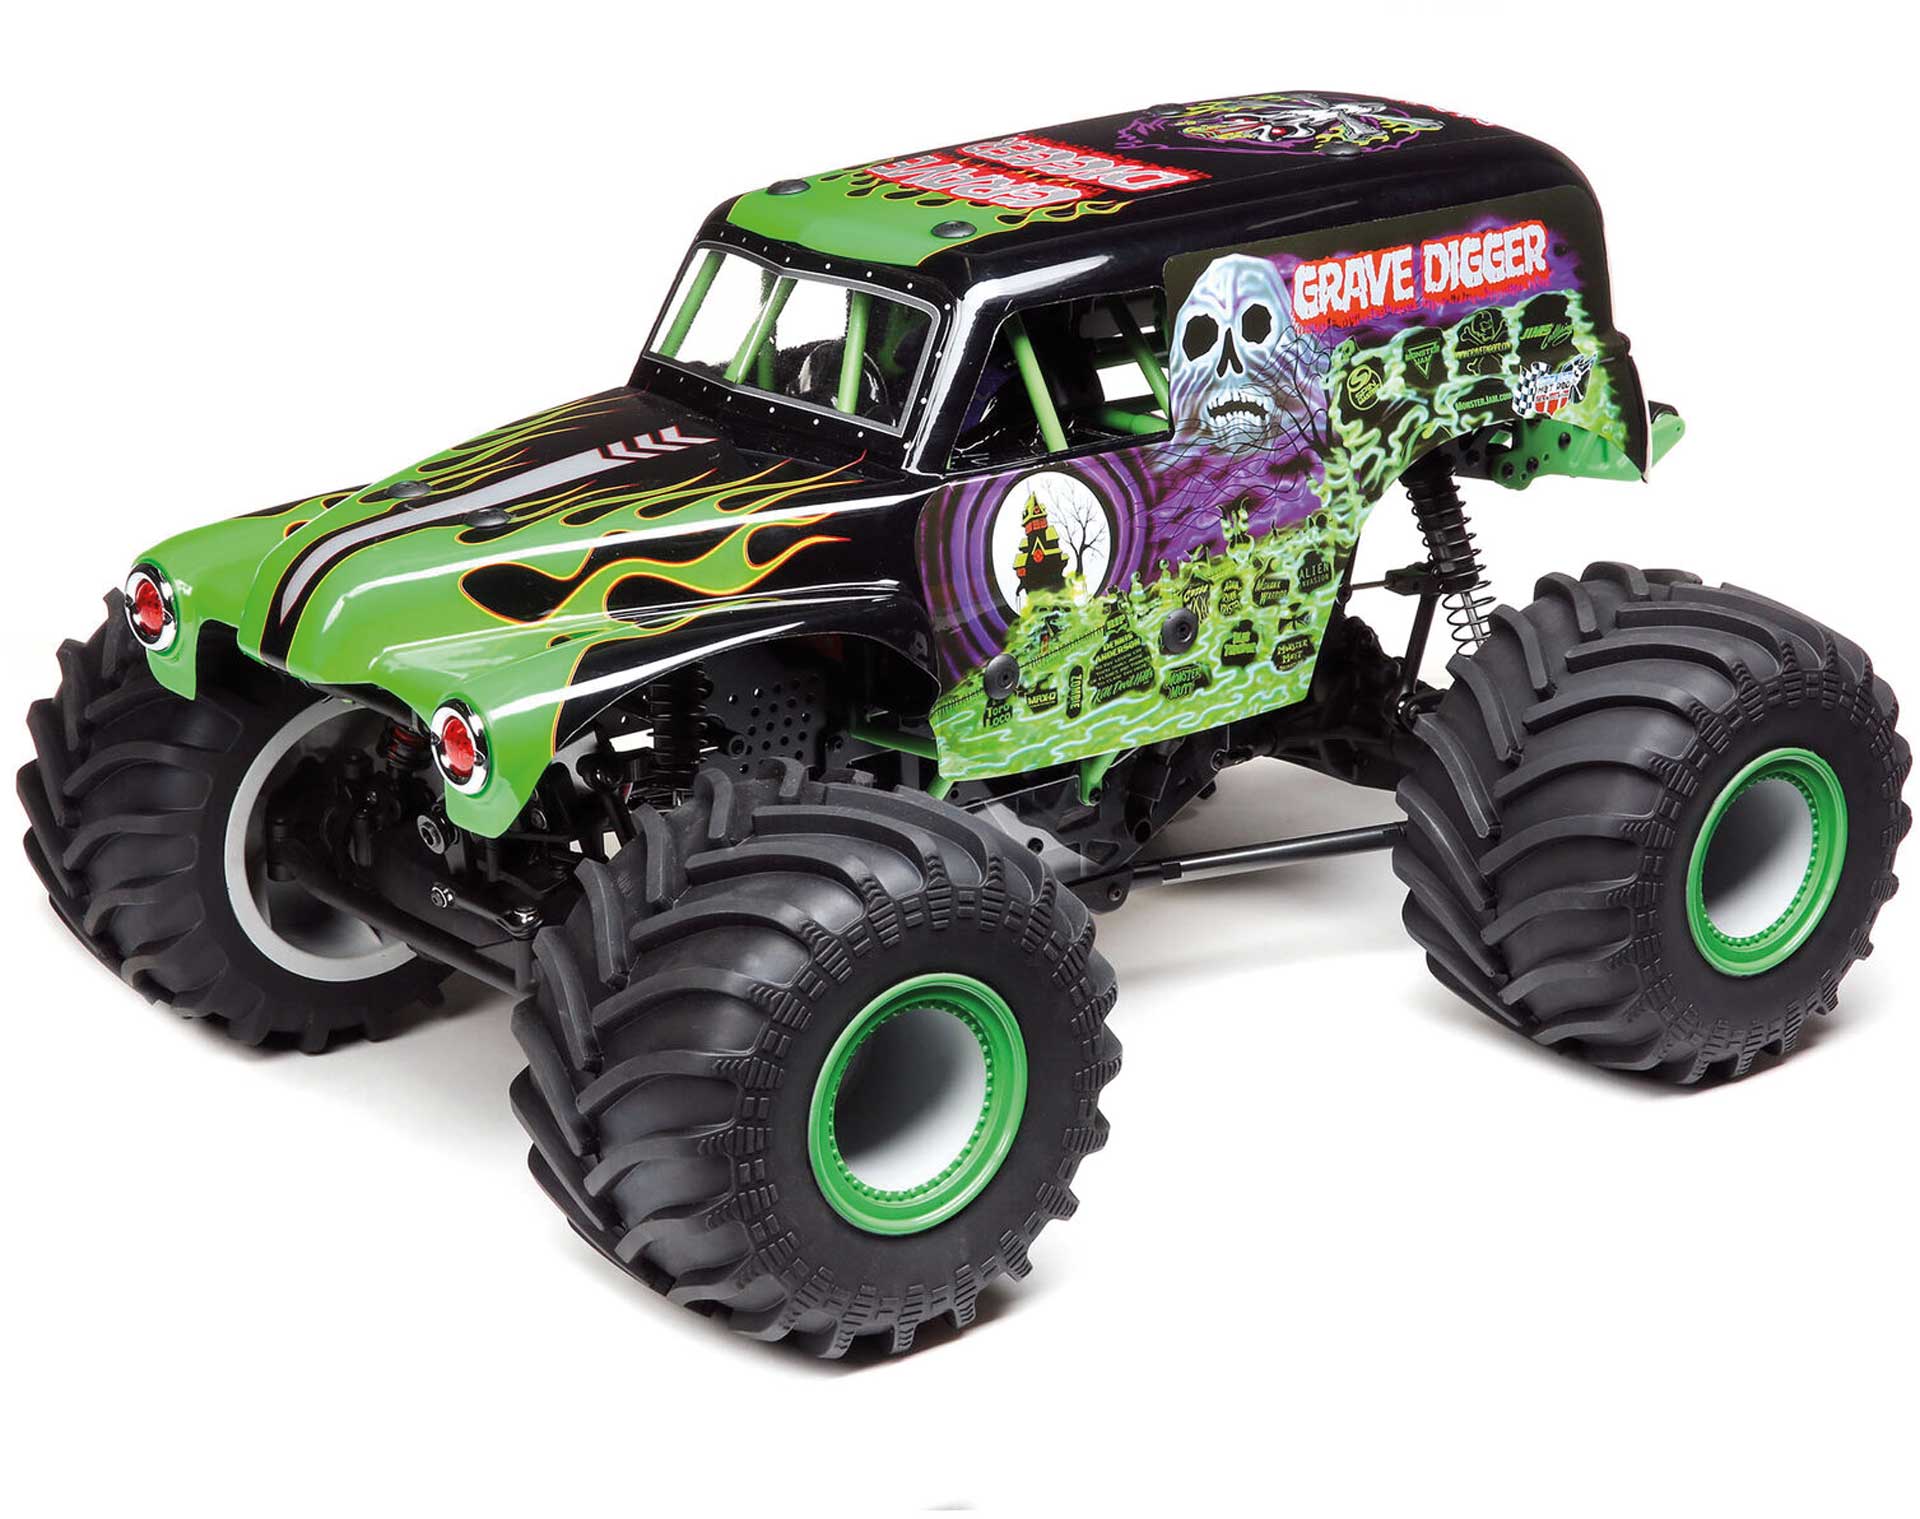 LOSI LMT 4X4 Solid Axle Monster Truck RTR, Grave Digger